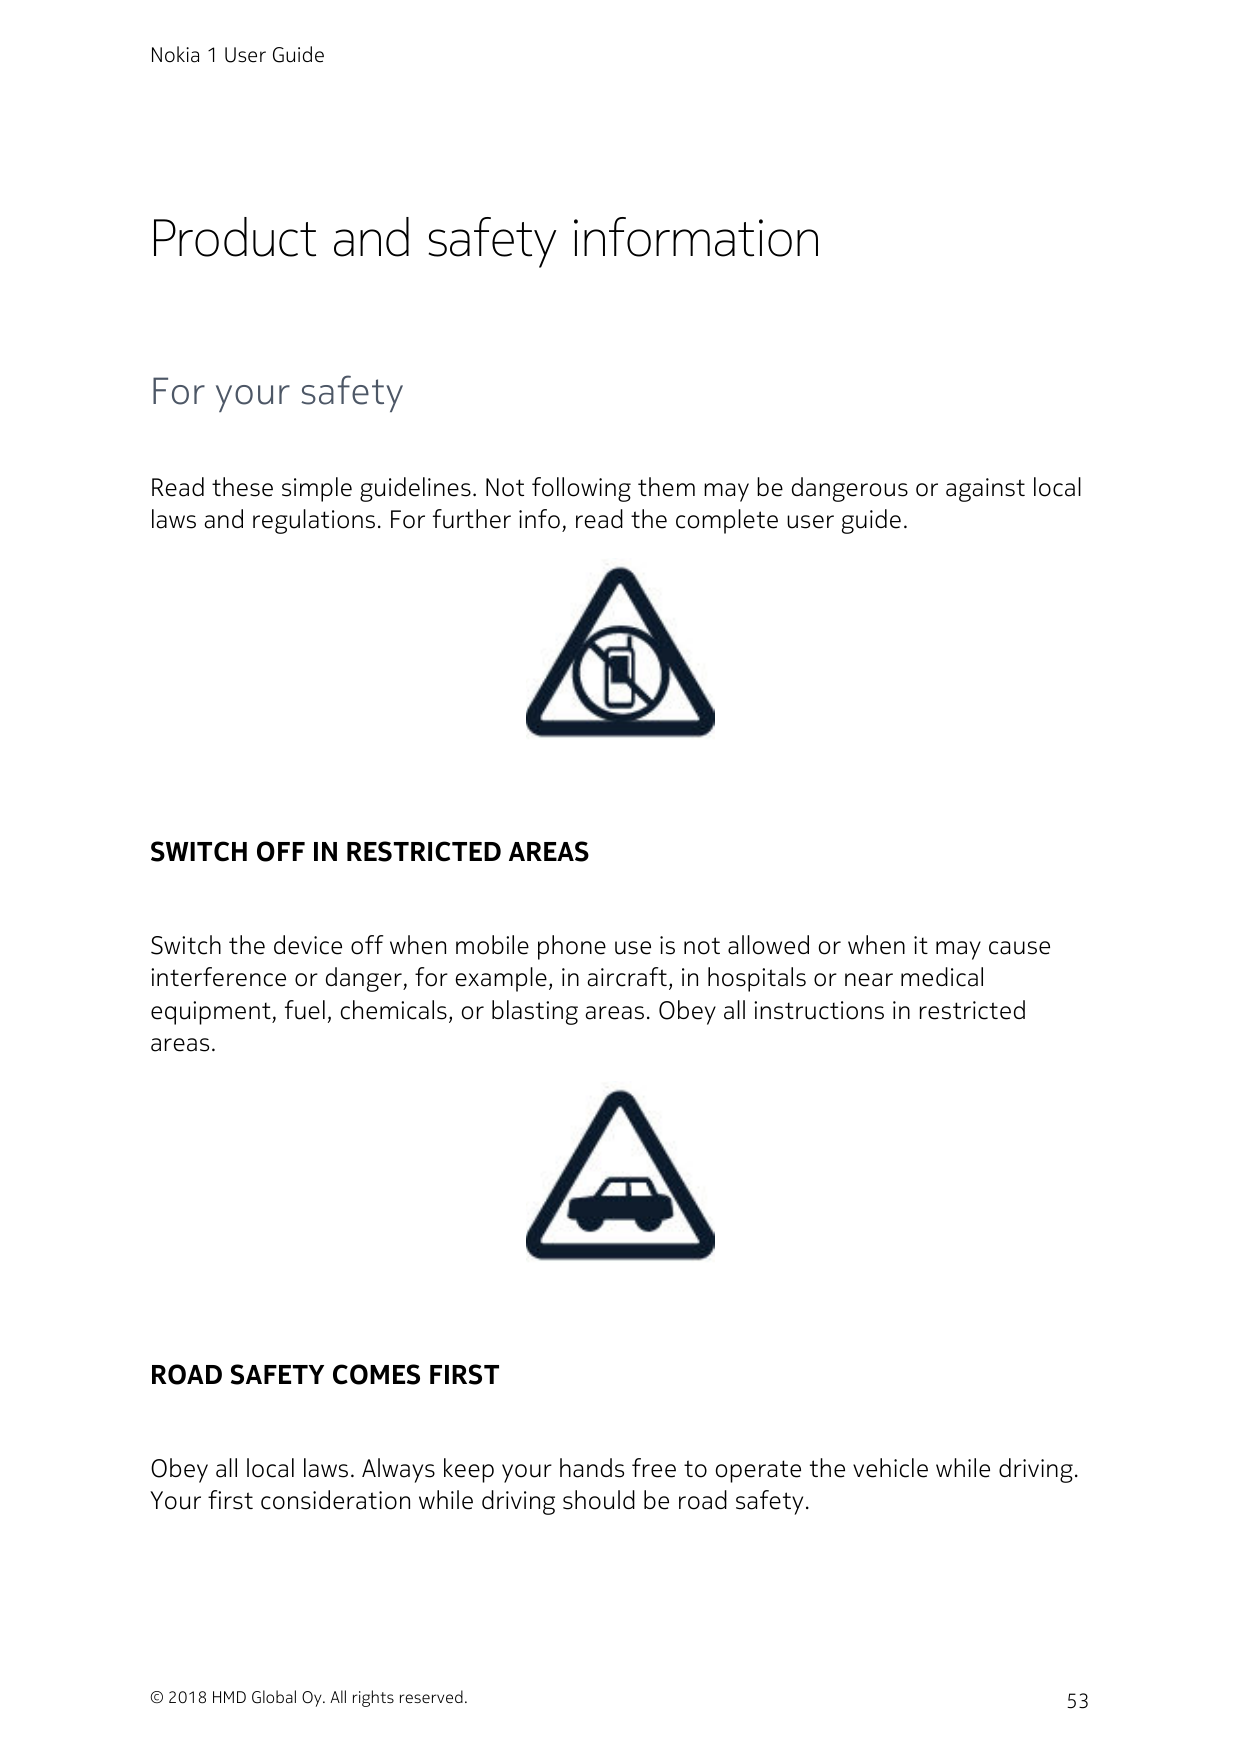 Nokia 1 User GuideProduct and safety informationFor your safetyRead these simple guidelines. Not following them may be dangerous